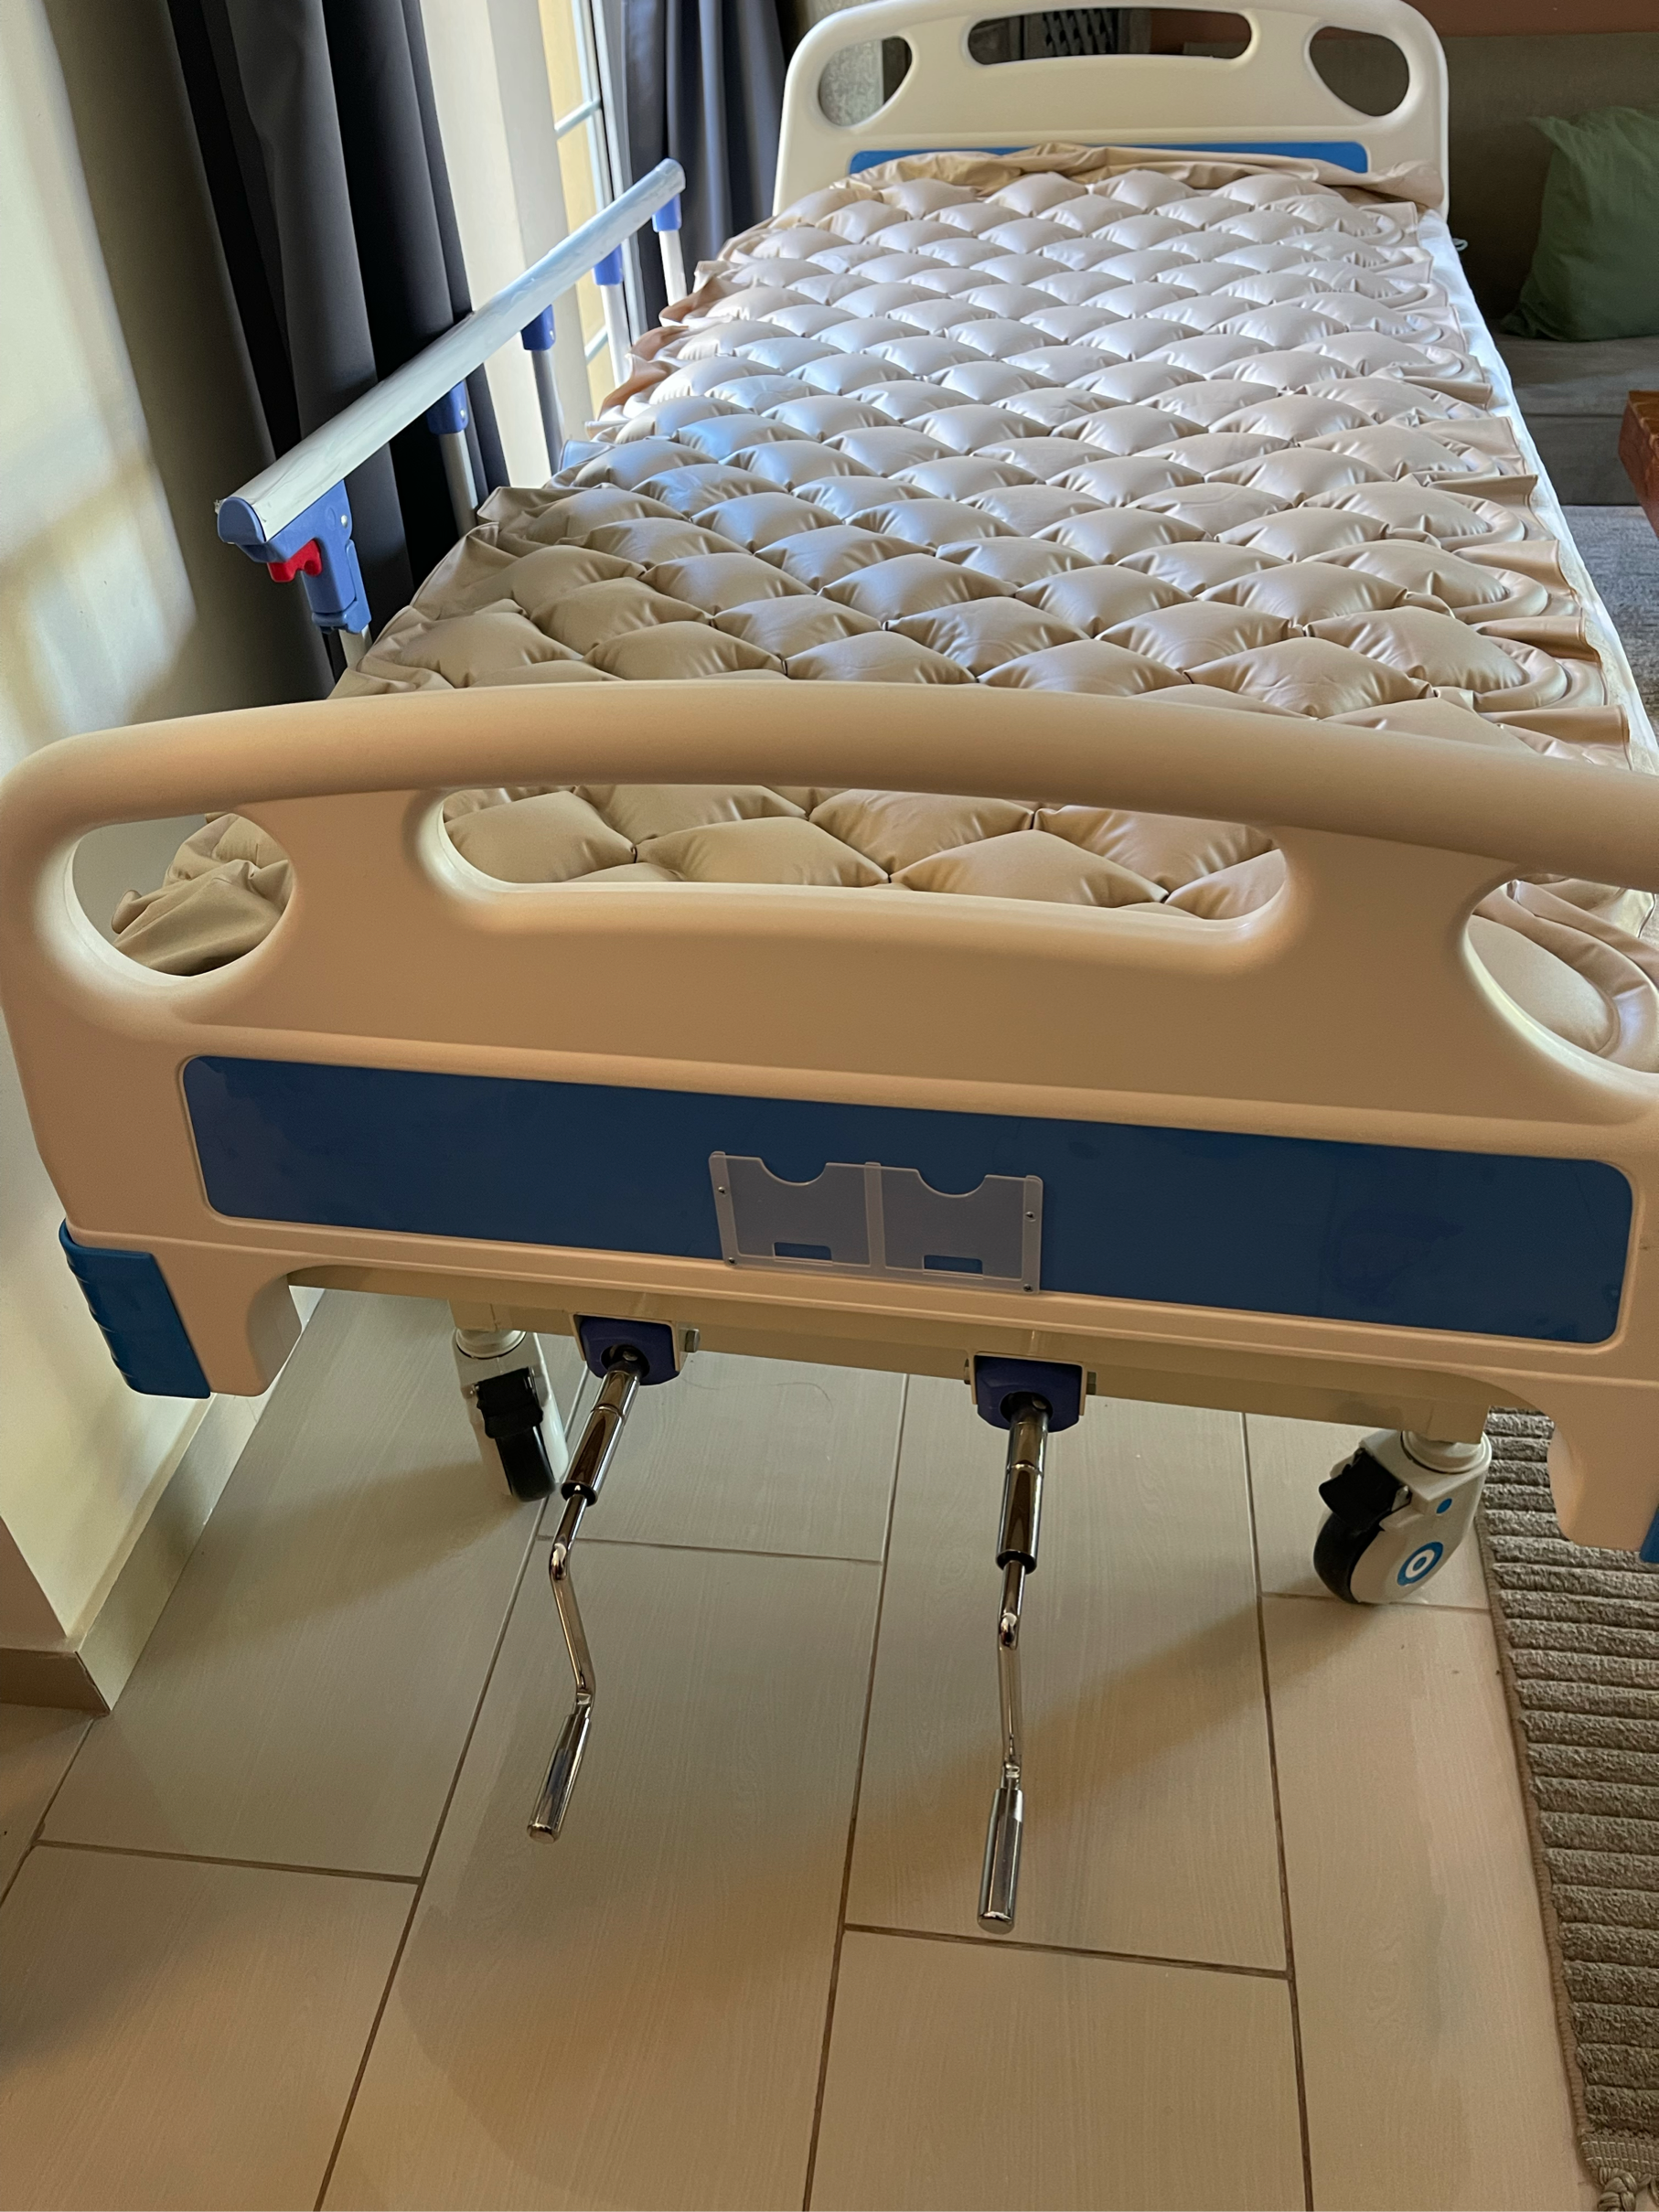 2 Function Manual Medical Bed 